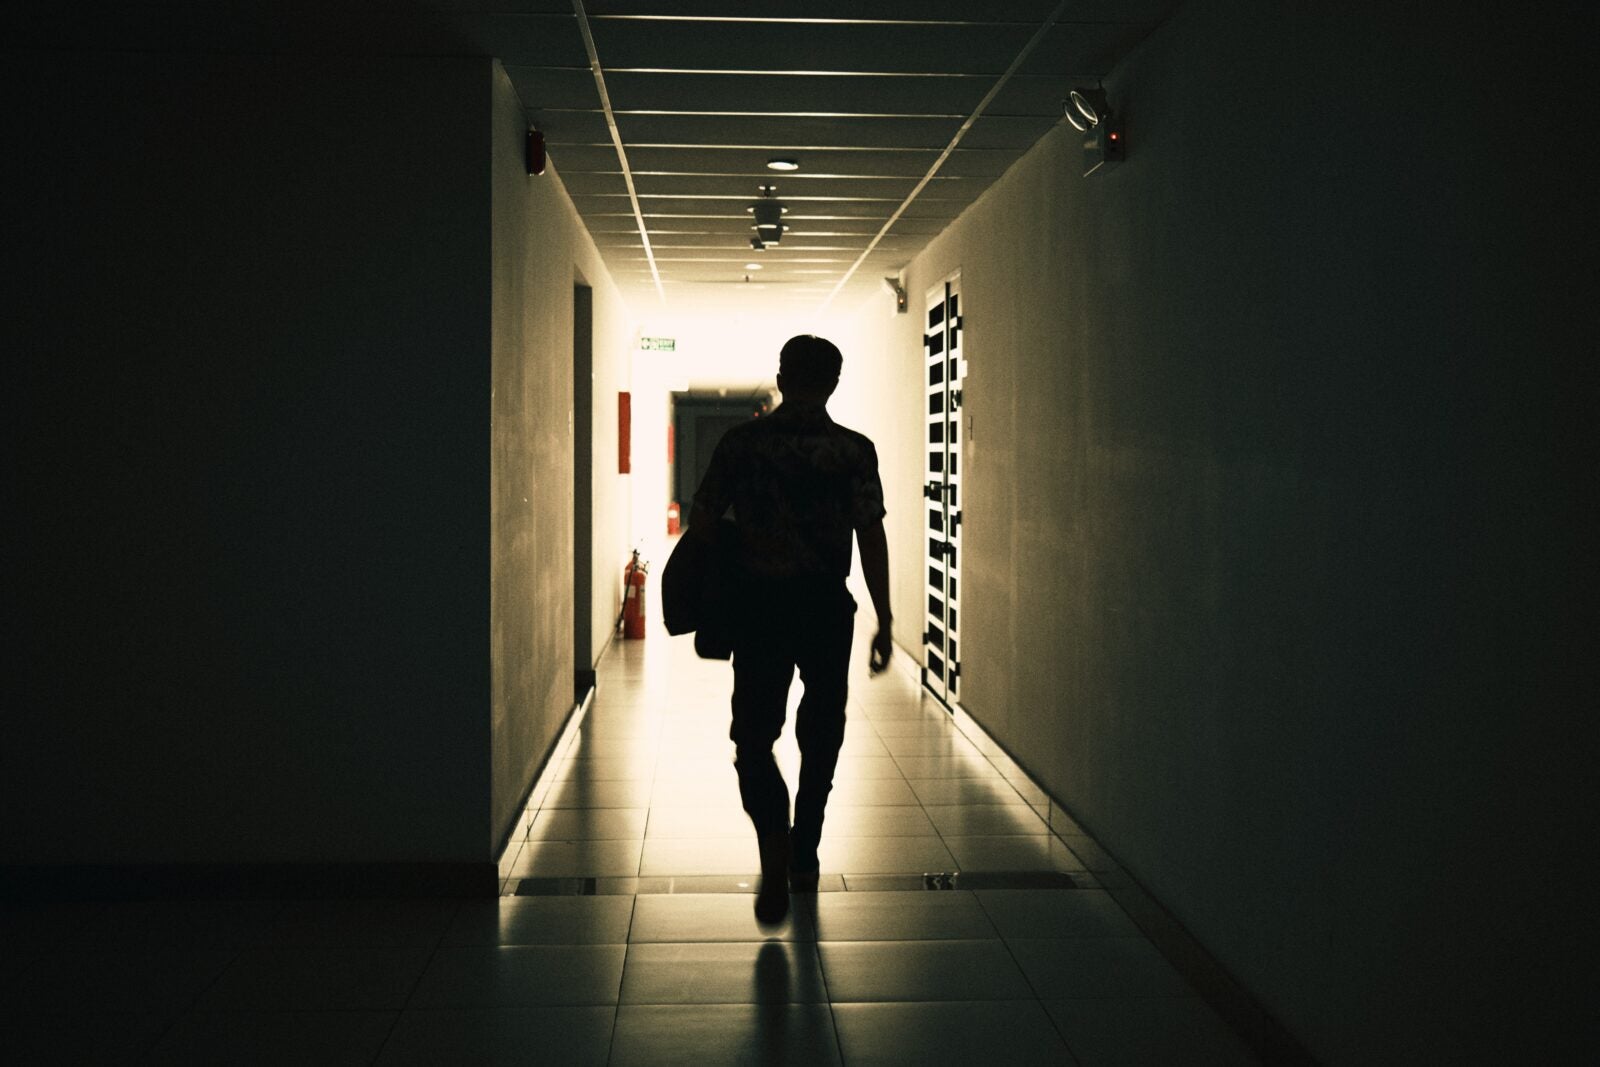 Silhouette of a man holding a bag leaving a hallway